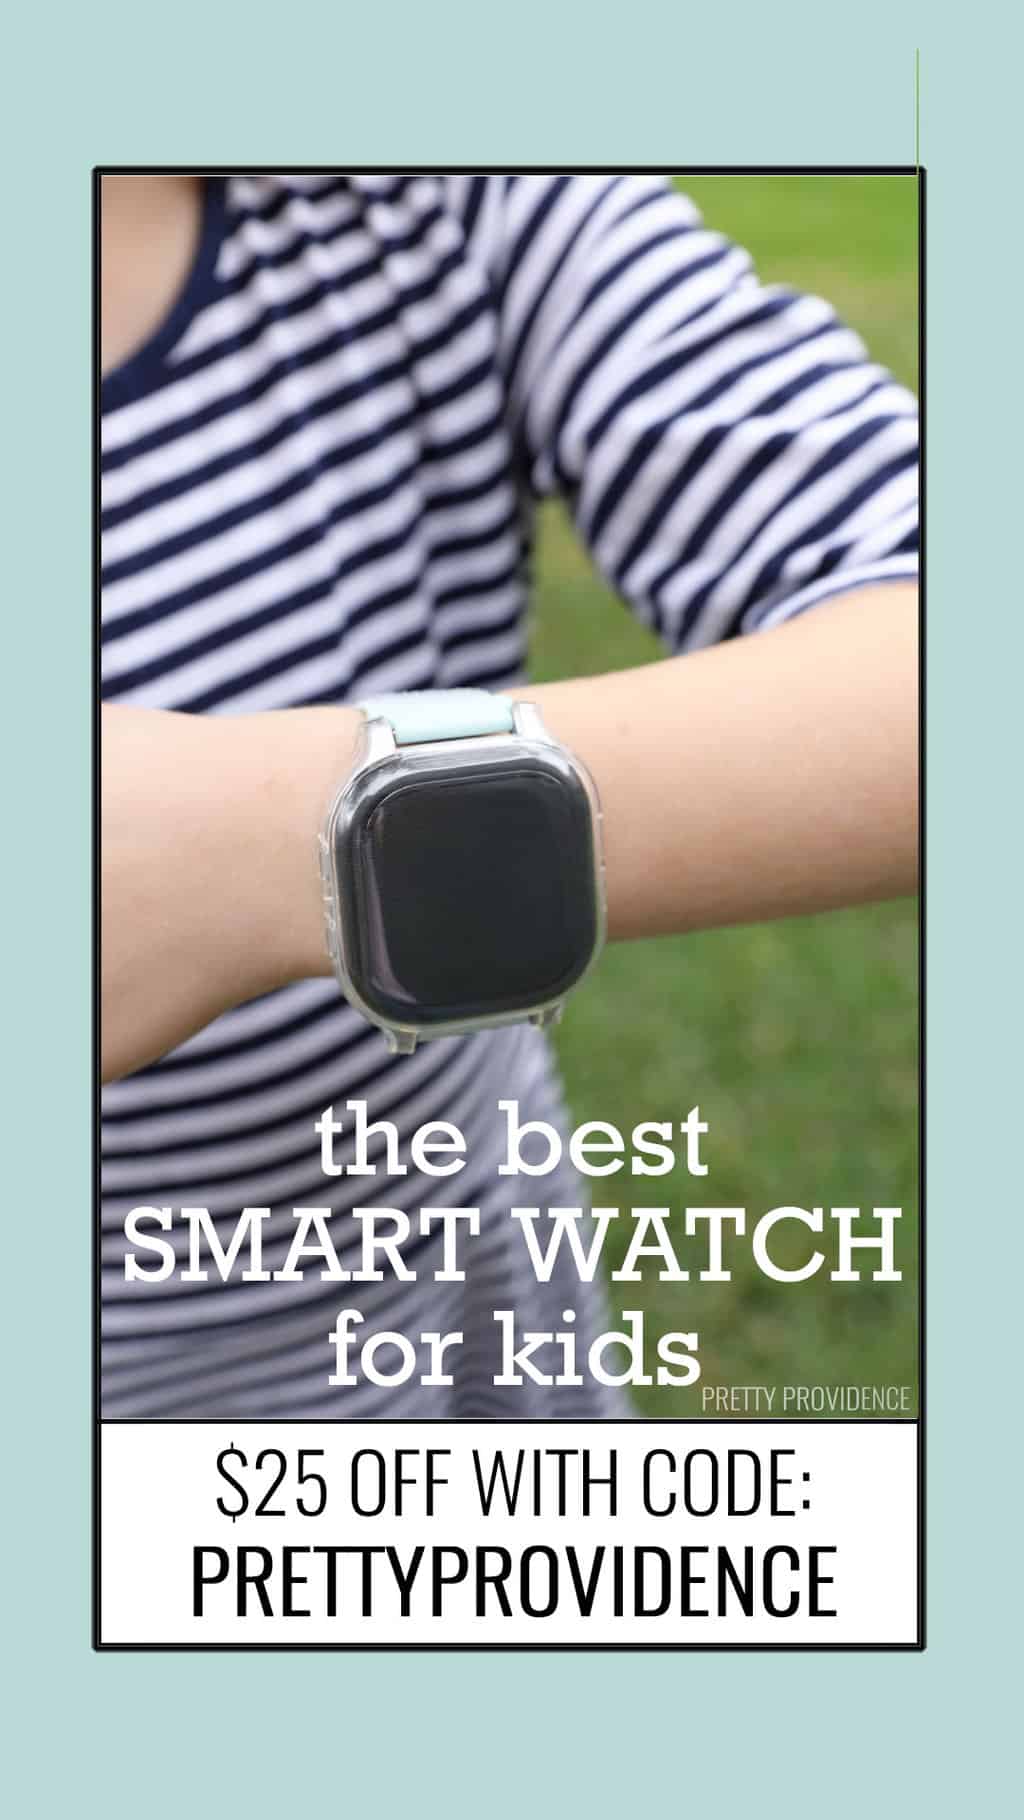 An Unpaid Review for the Best Kid Smart Watch: the Gabb Watch